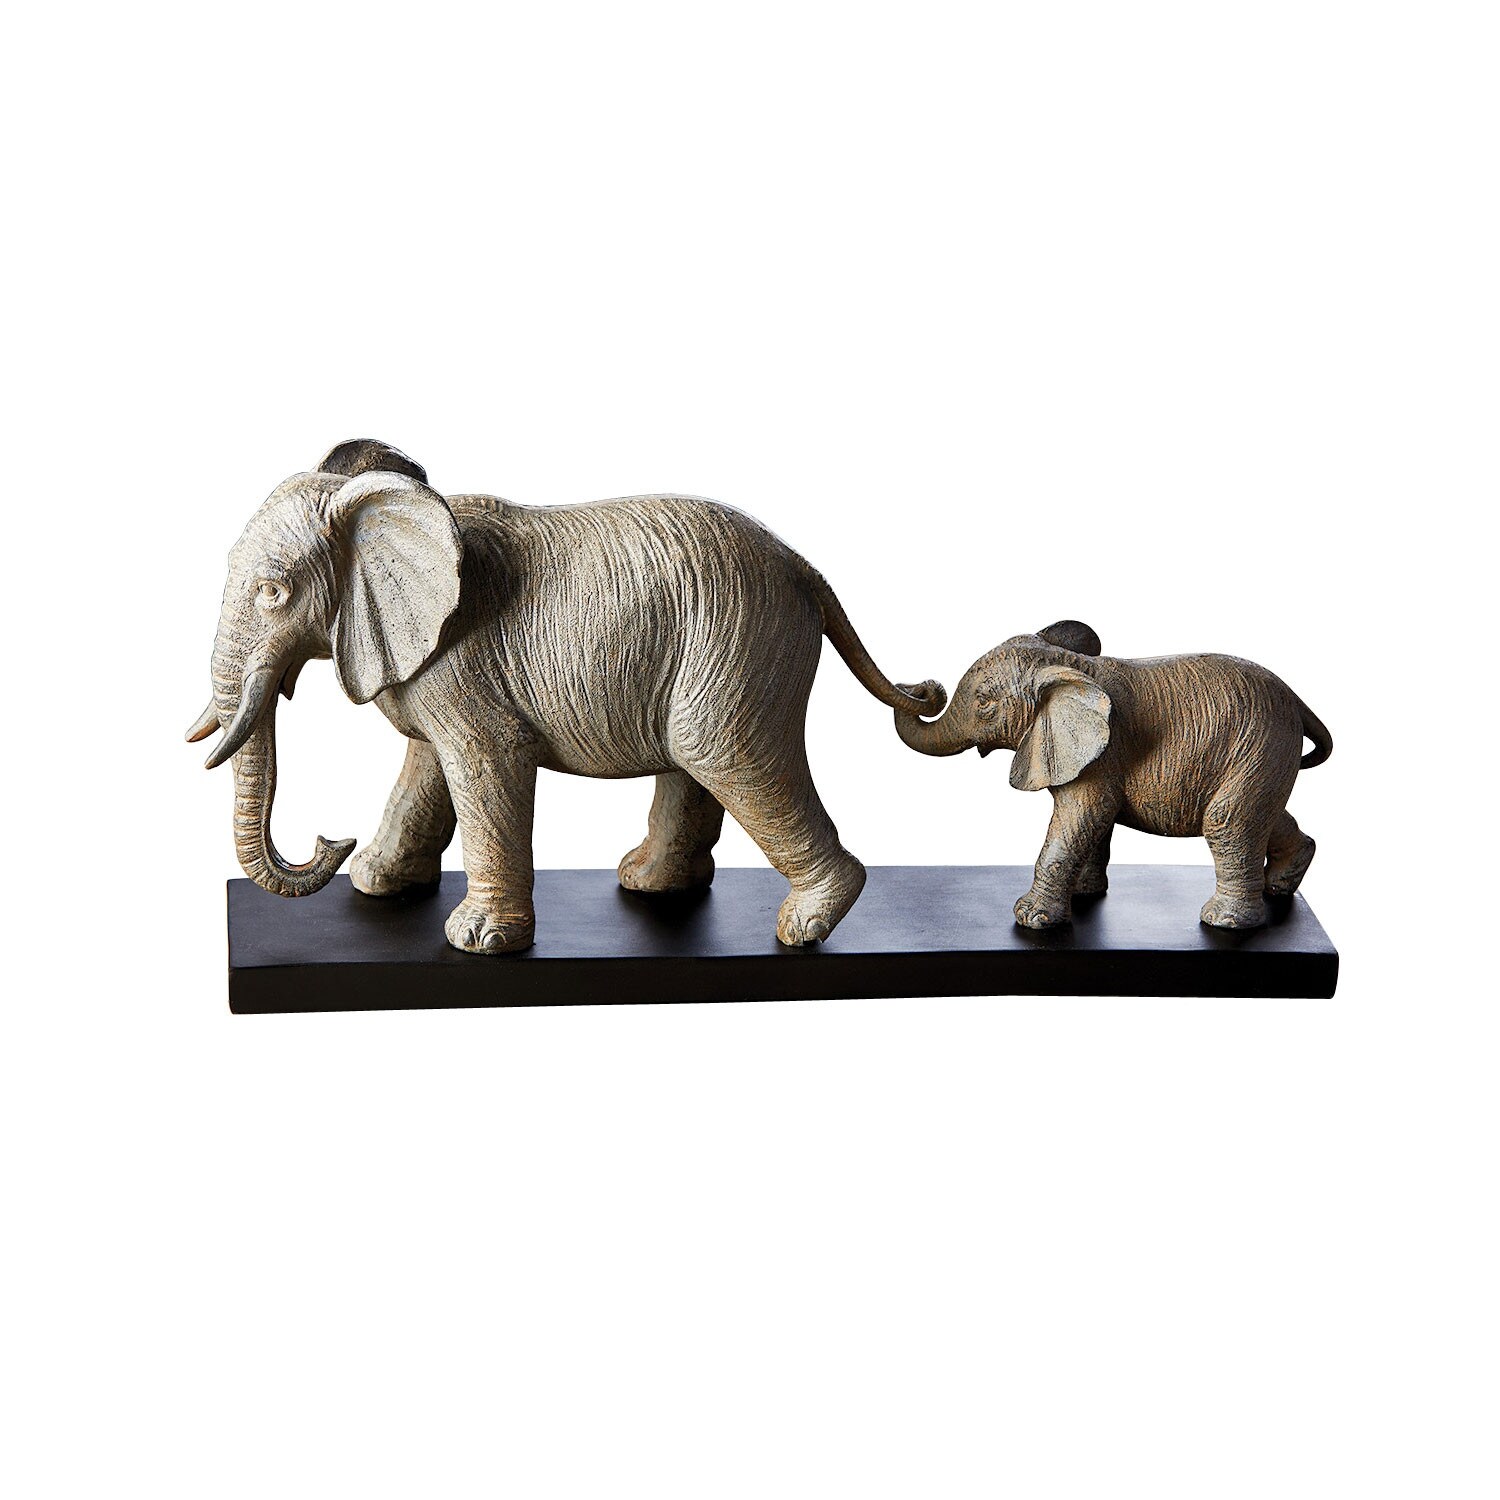 Creative Co Op Elephant Walk Sculpture Animal Mother And Child Figurine Gray 18 Inch X 4 Inch X 3 Inch Overstock